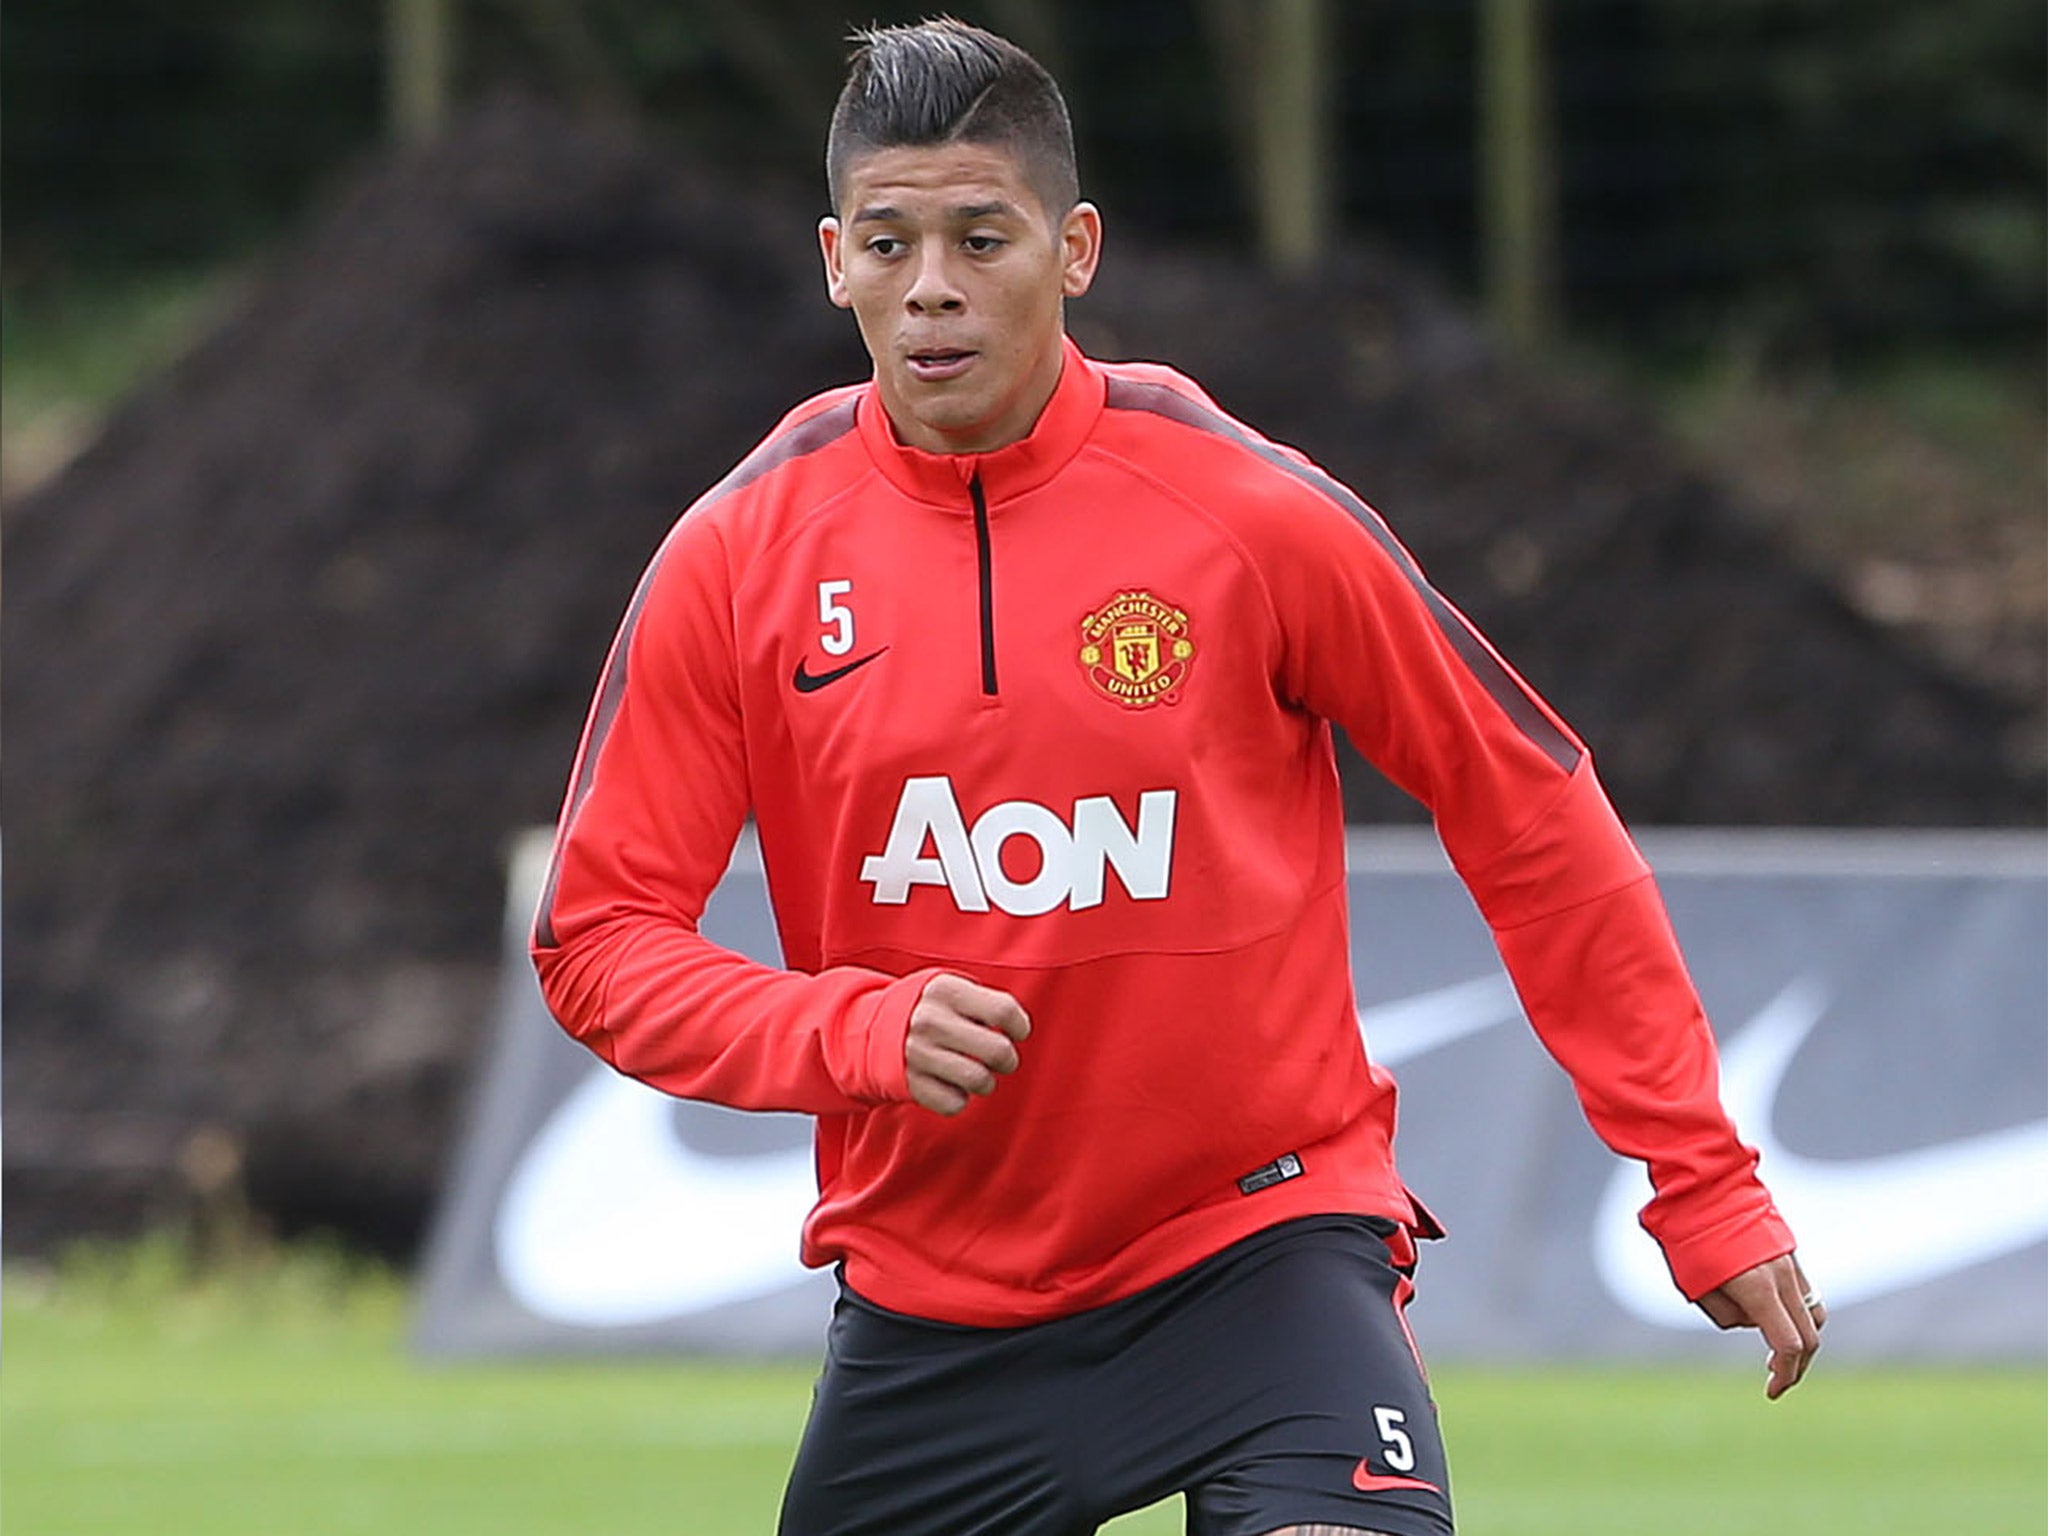 Sporting Lisbon’s president has hit out at third-party owners following the sale of Marcos Rojo